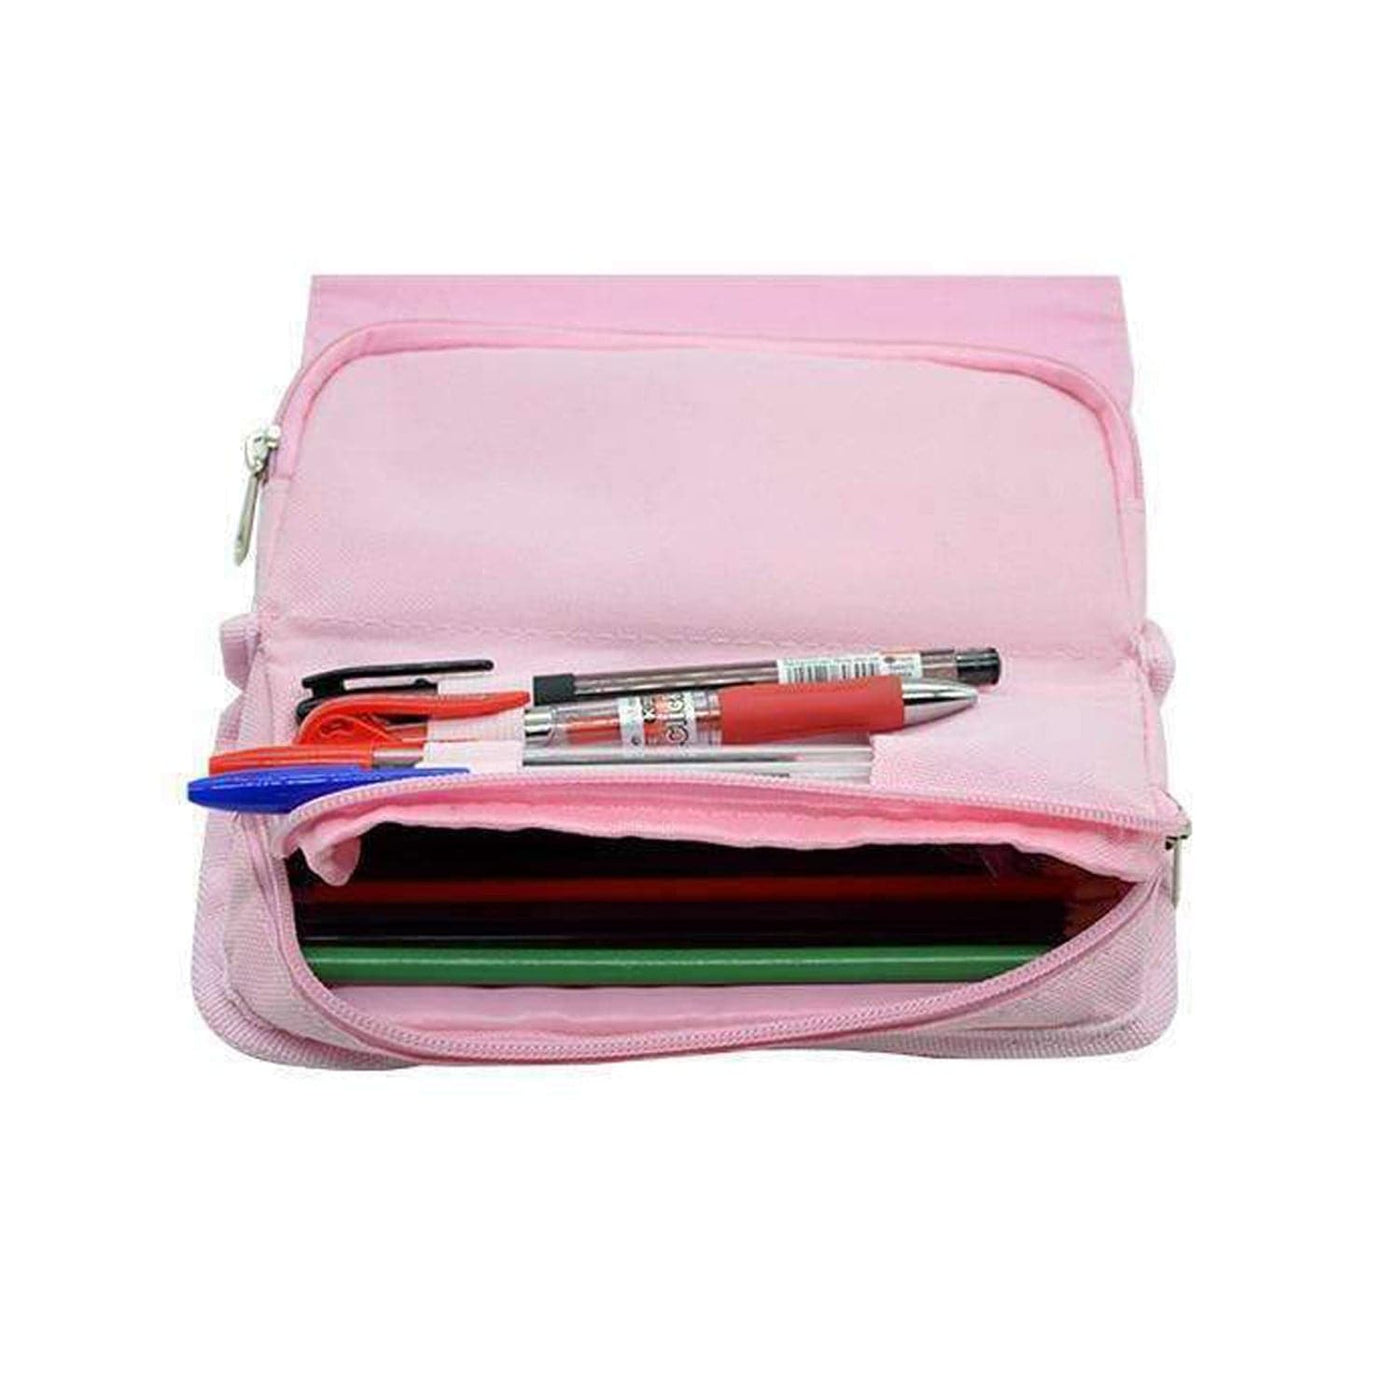 Multi Coloured Butterfly - Butterfly Patterns Pencil Case